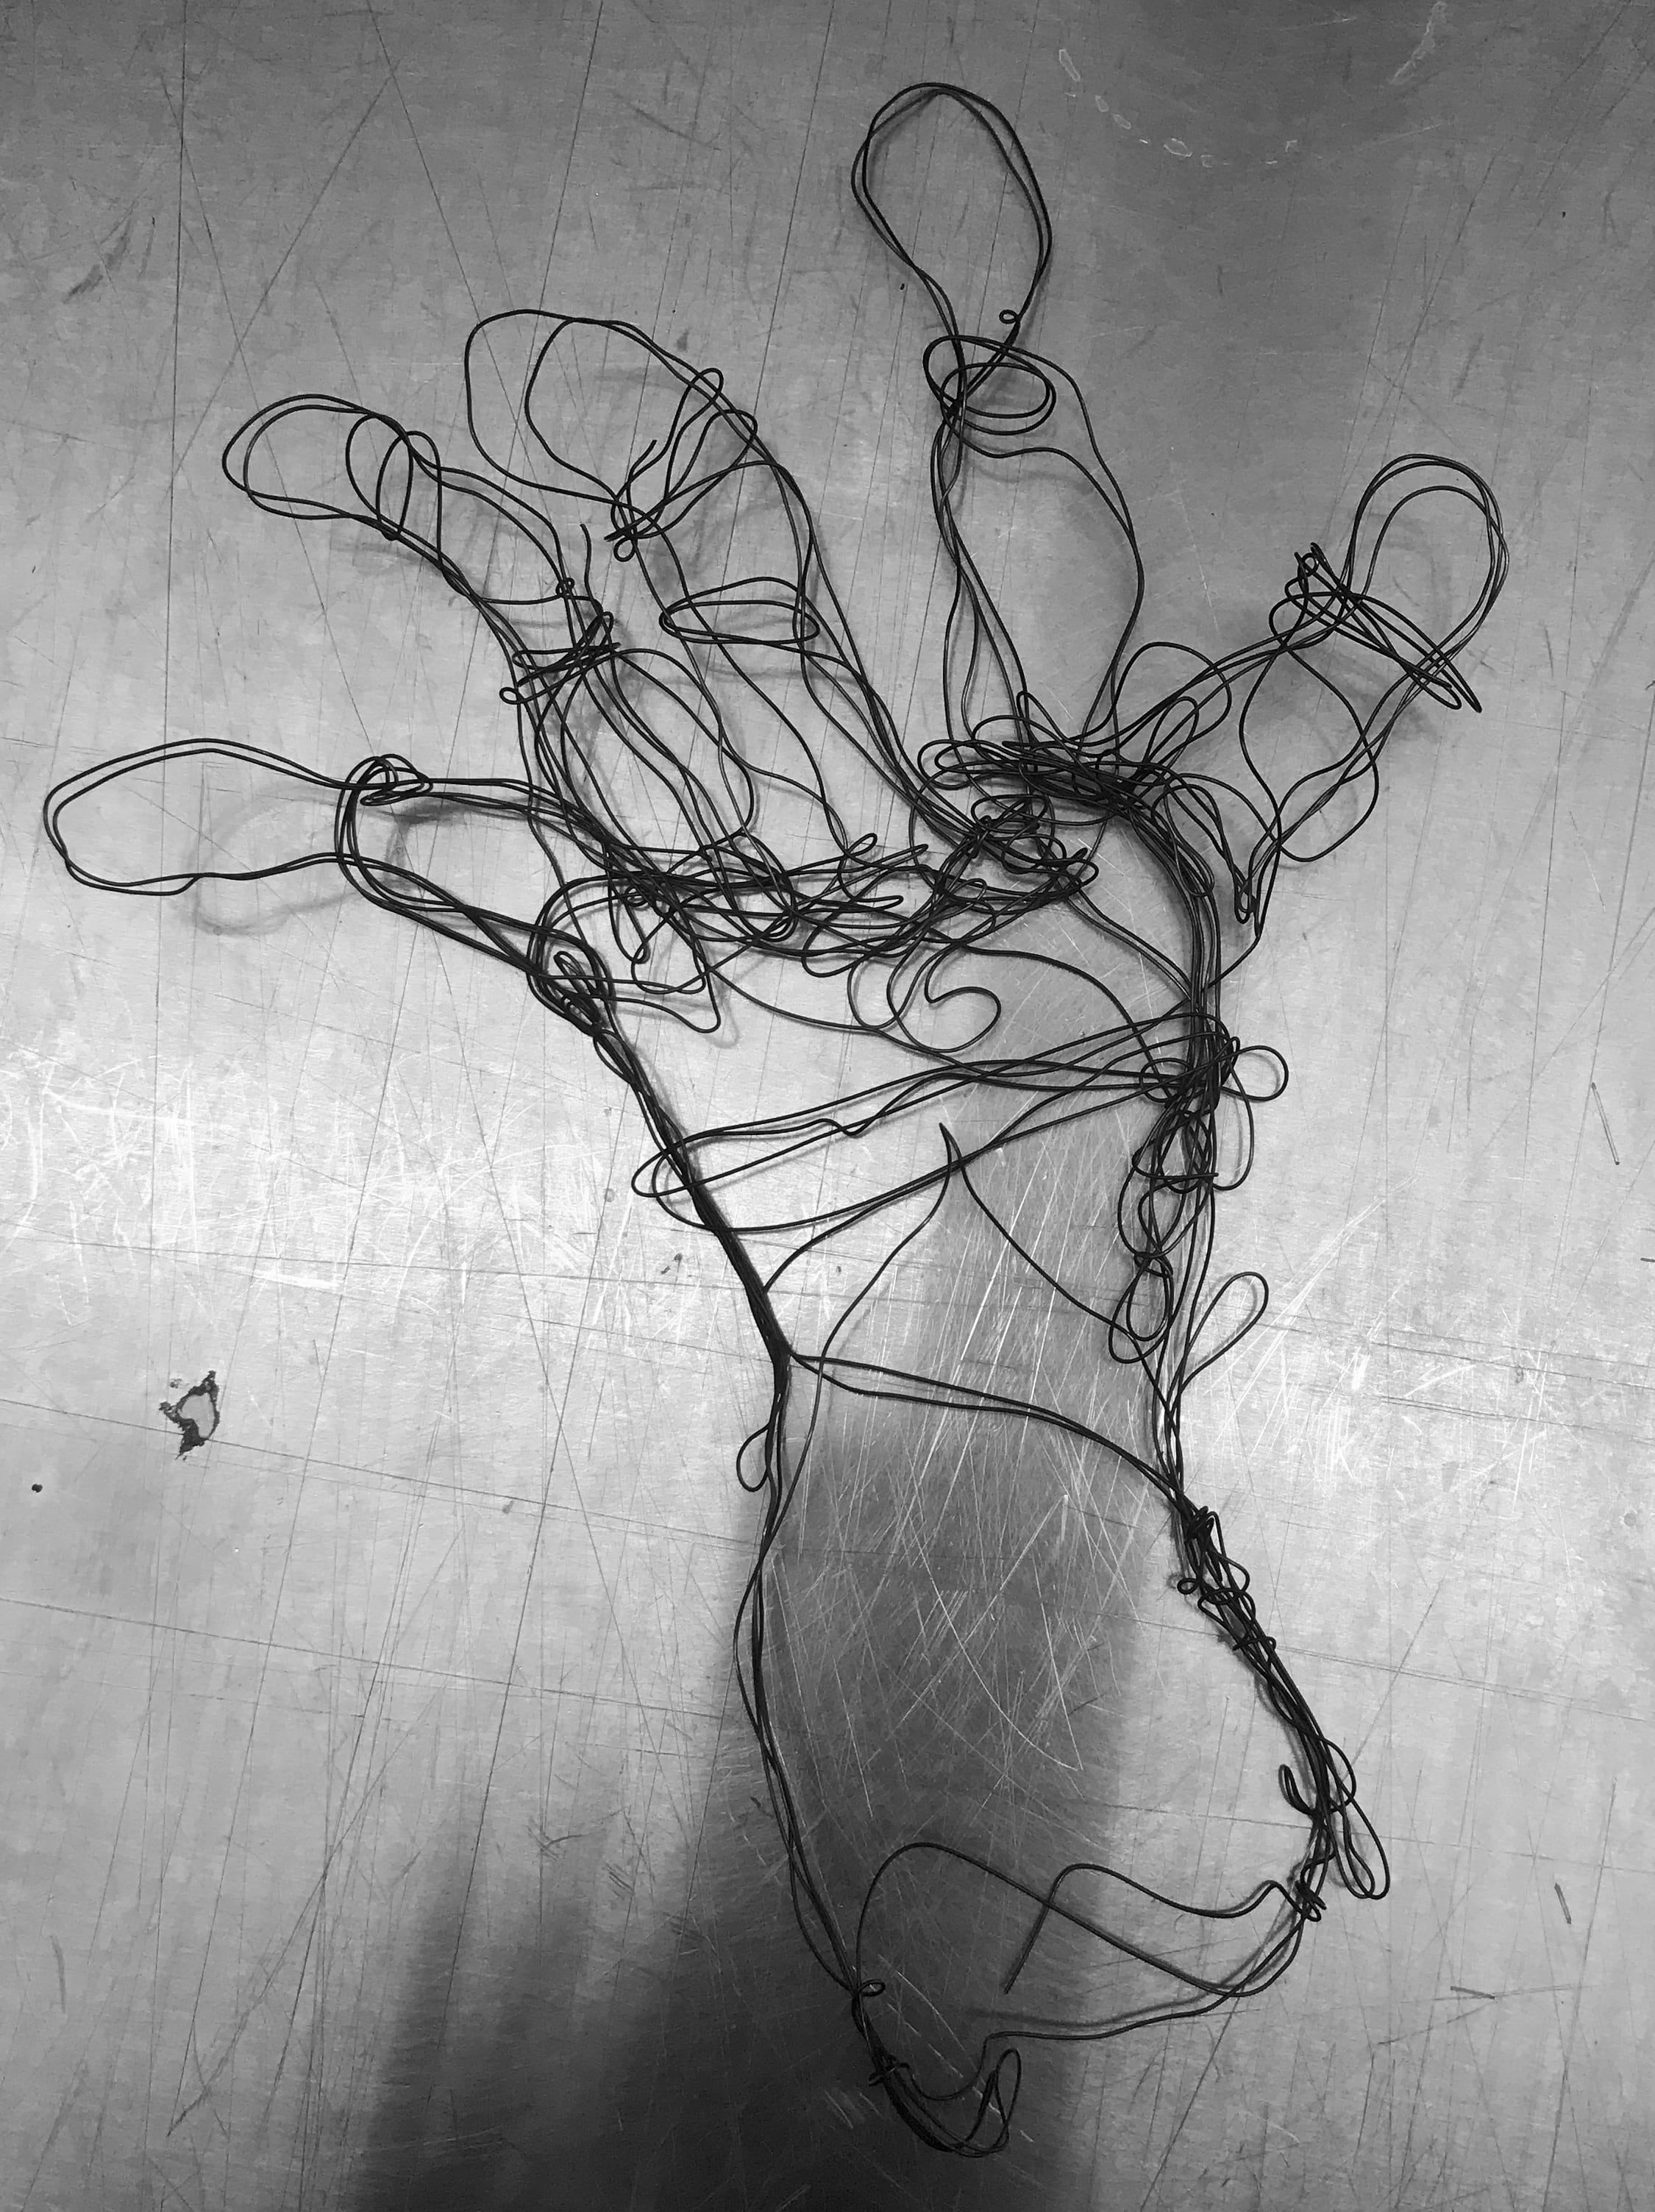 [Space & Materiality] A3: Wire studies